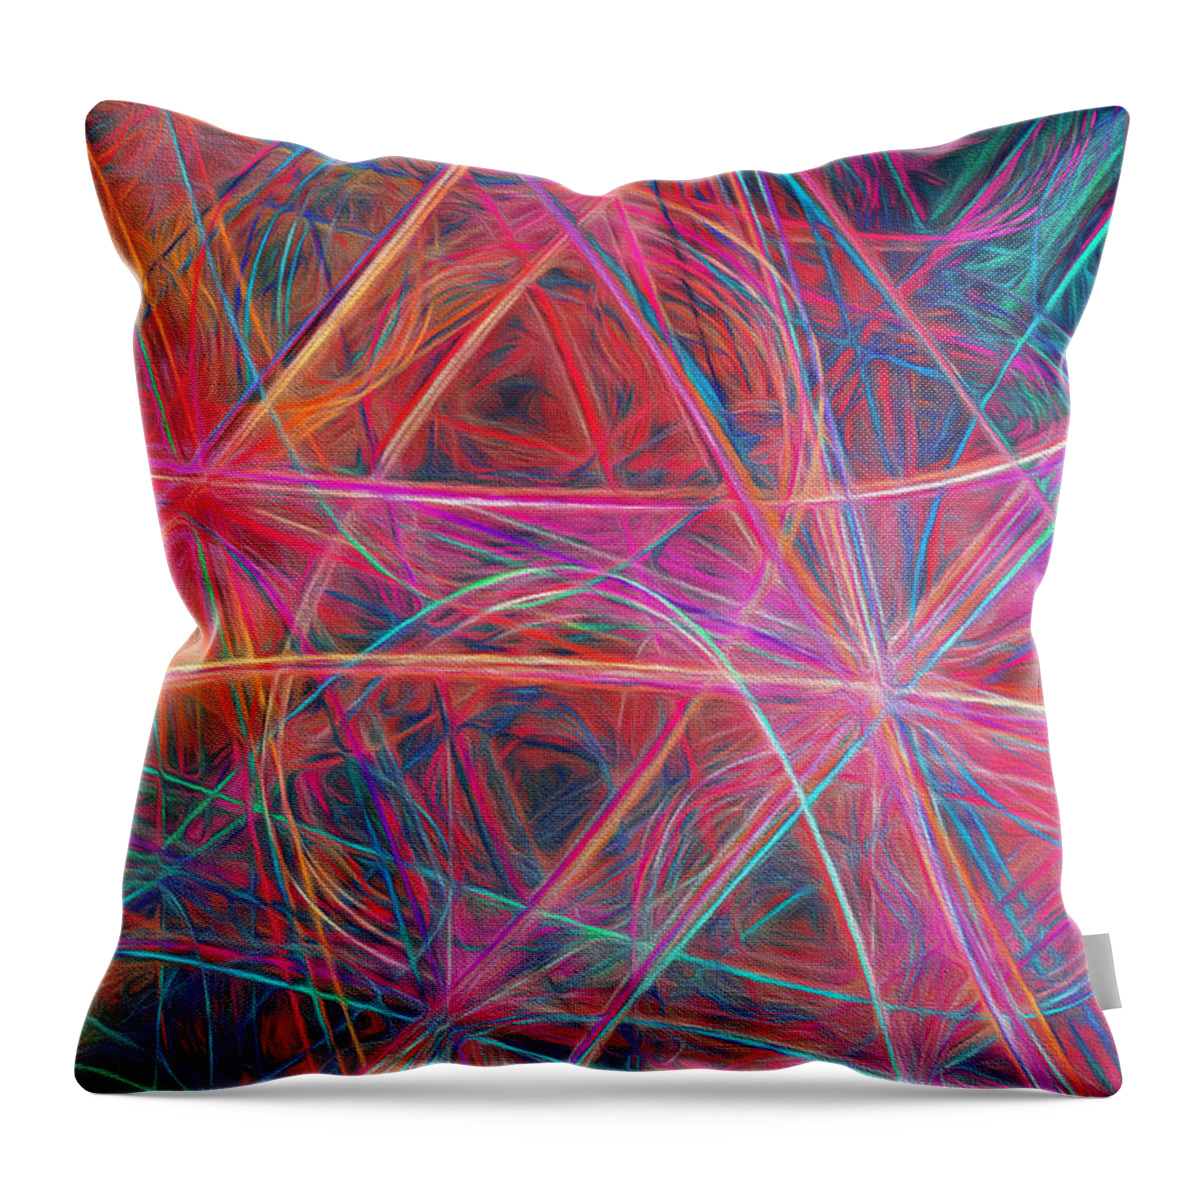 Andee Design Abstract Throw Pillow featuring the digital art Abstract Light Show by Andee Design